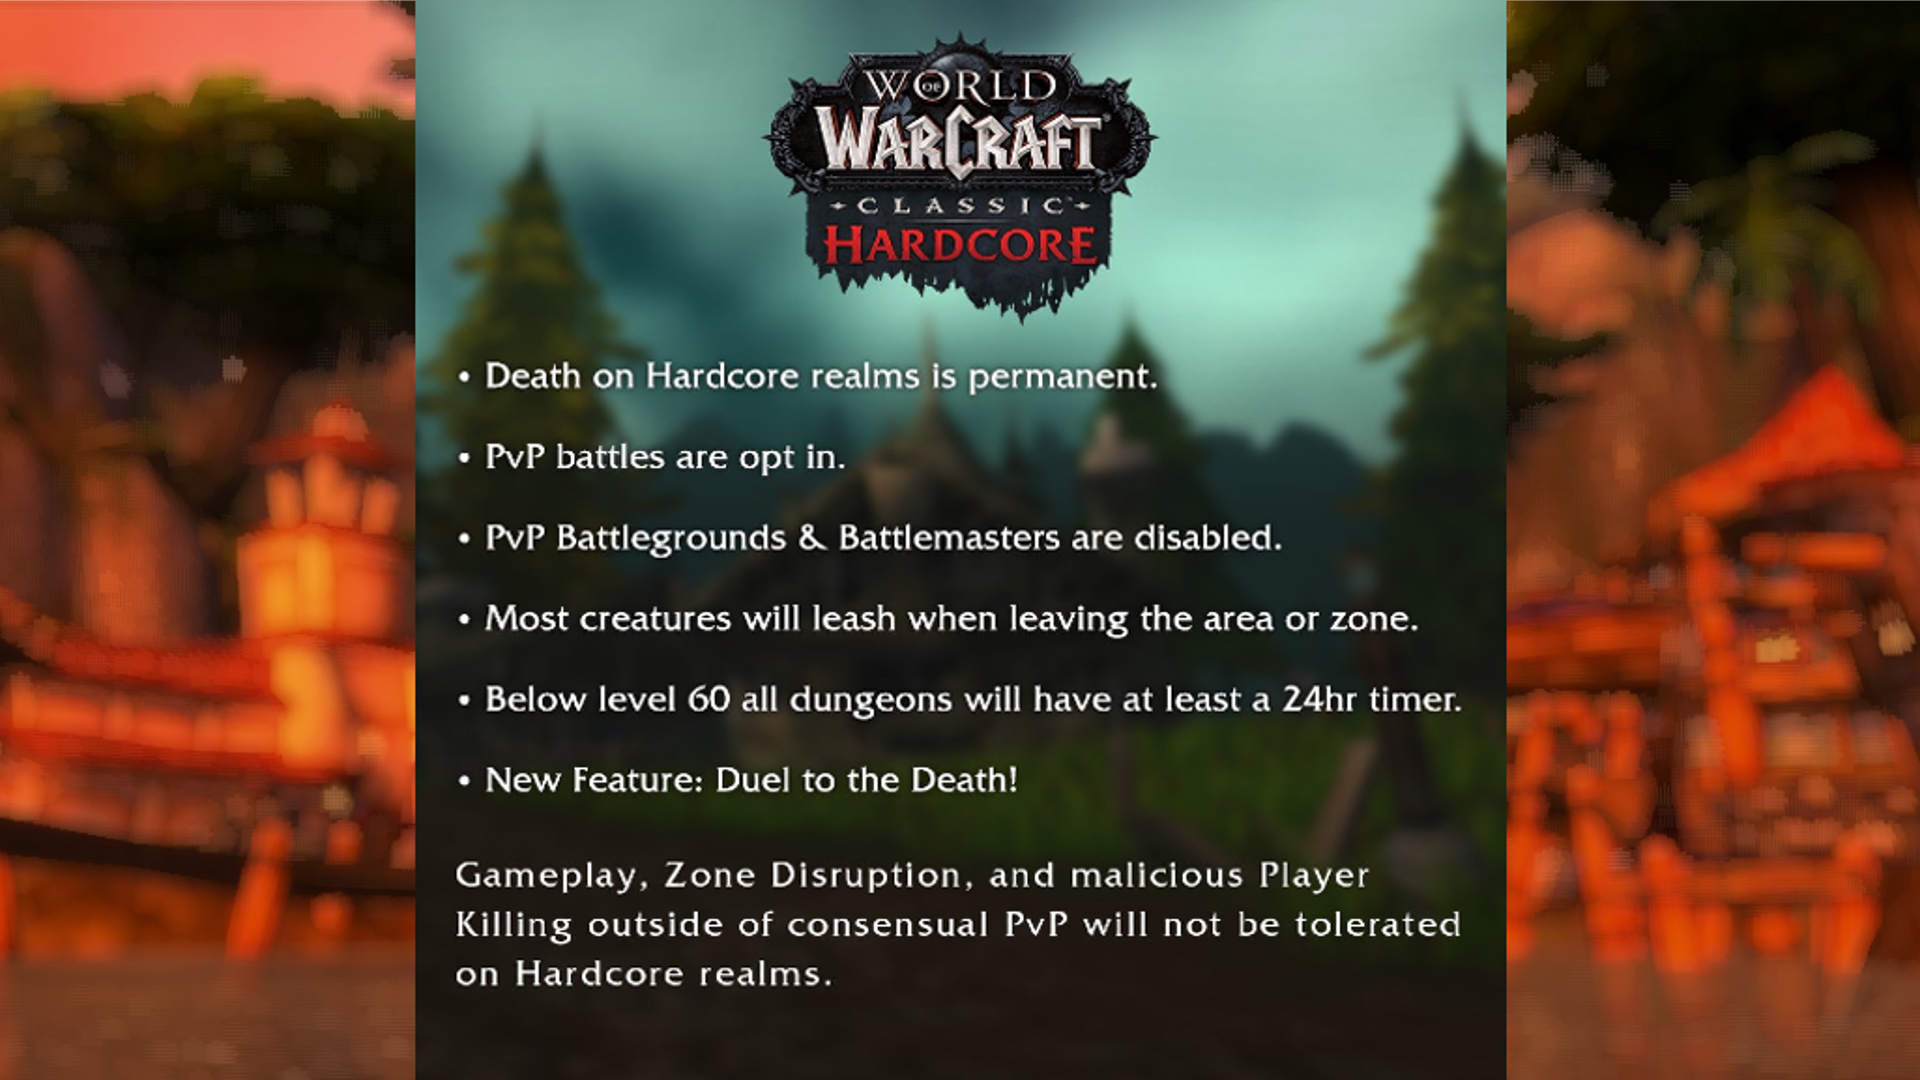 Official image from World of Warcraft on its upcoming hardcore mode detailing the features